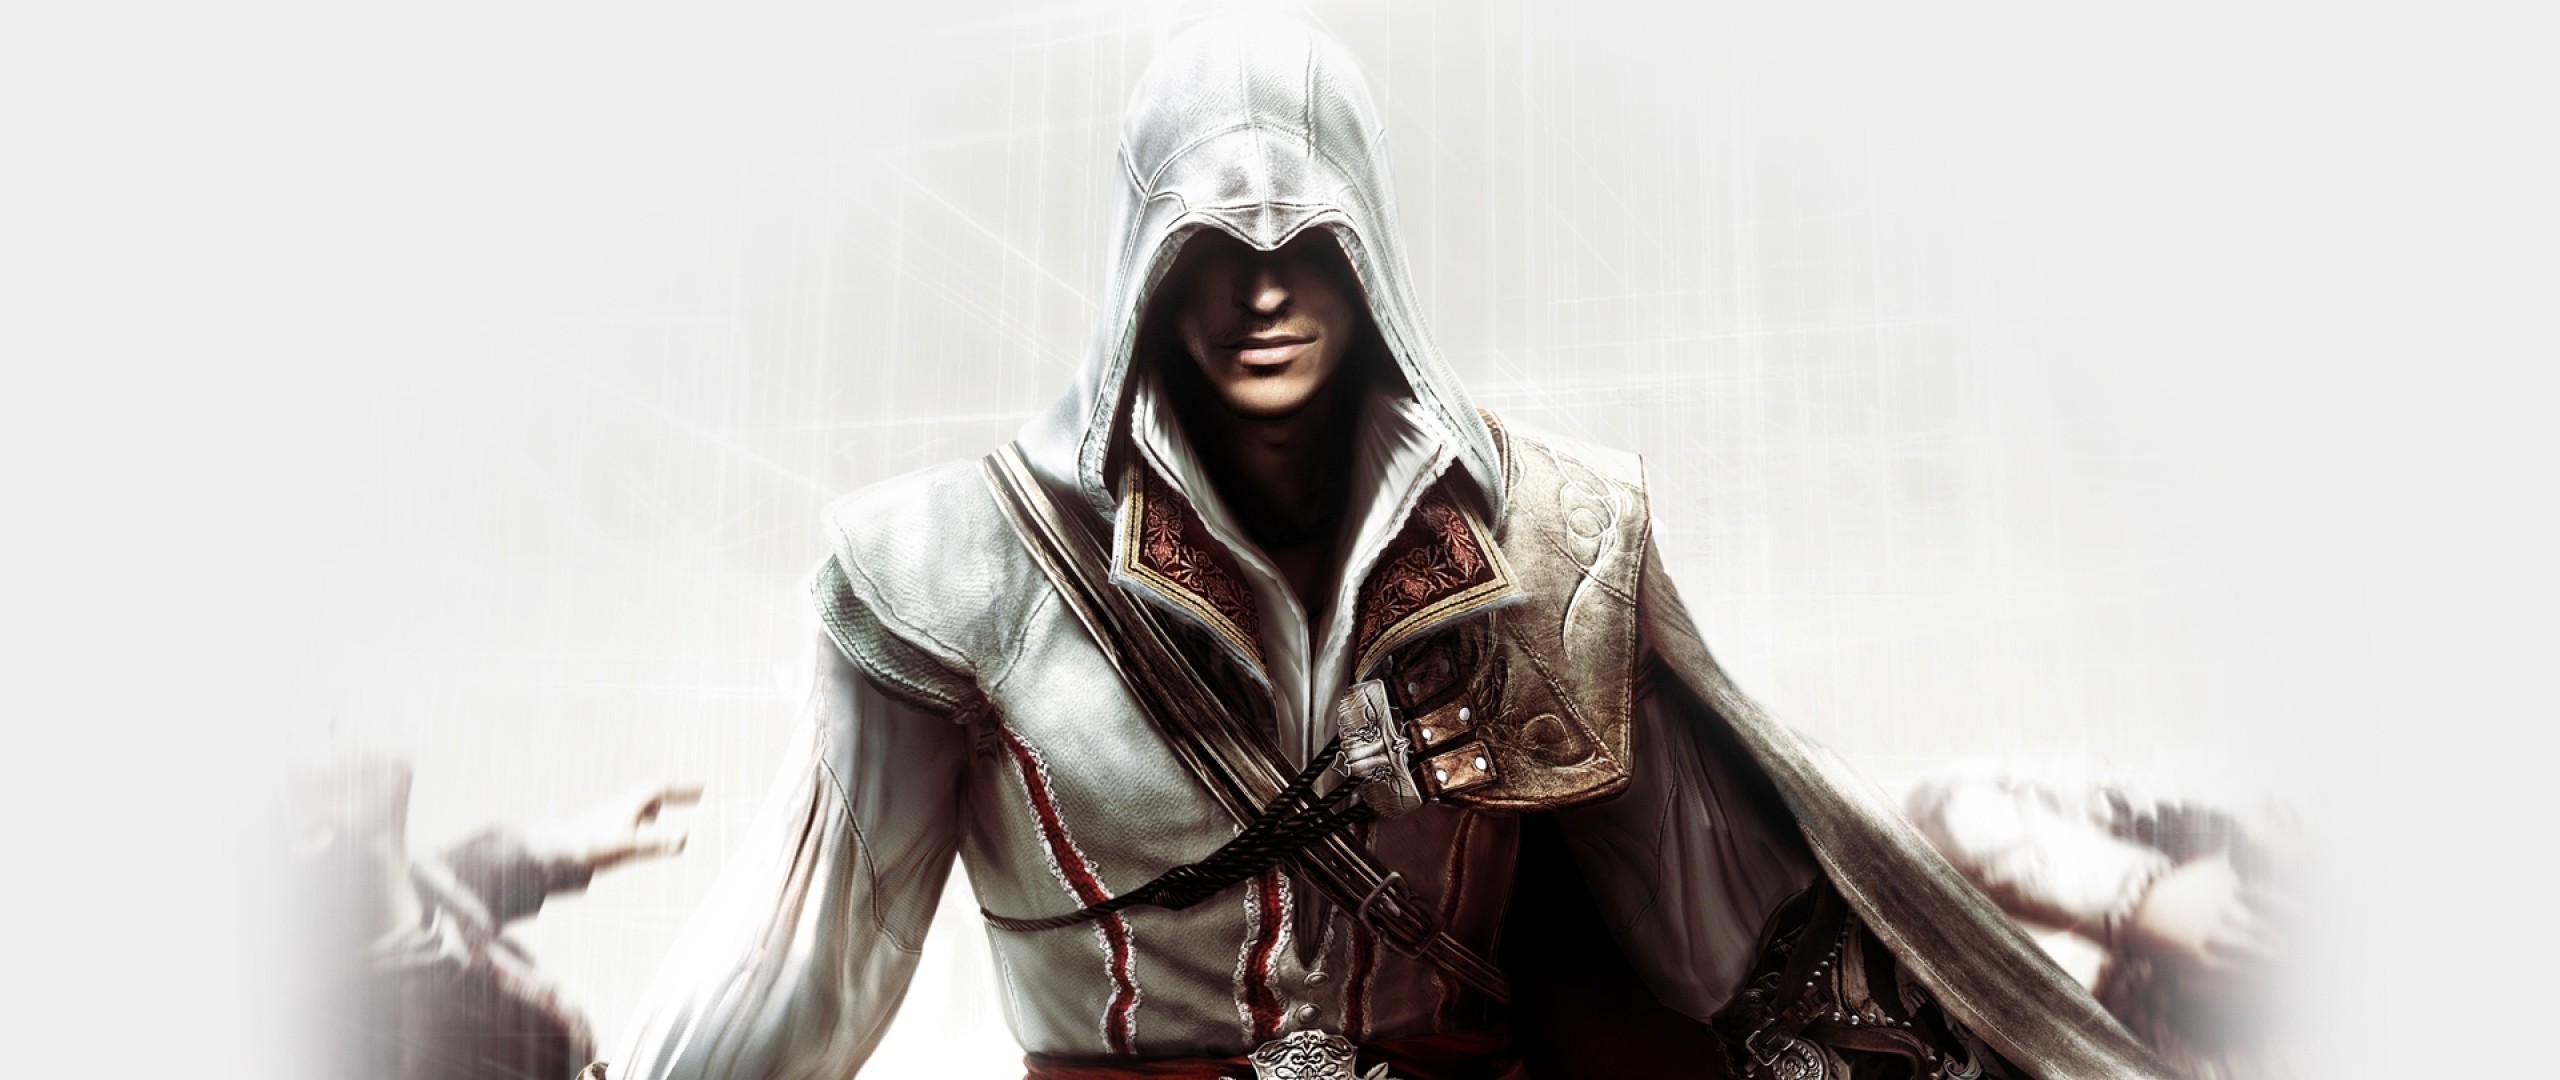 2560x1080  Wallpaper assassins creed 2, desmond miles, arm, peoples, shadow